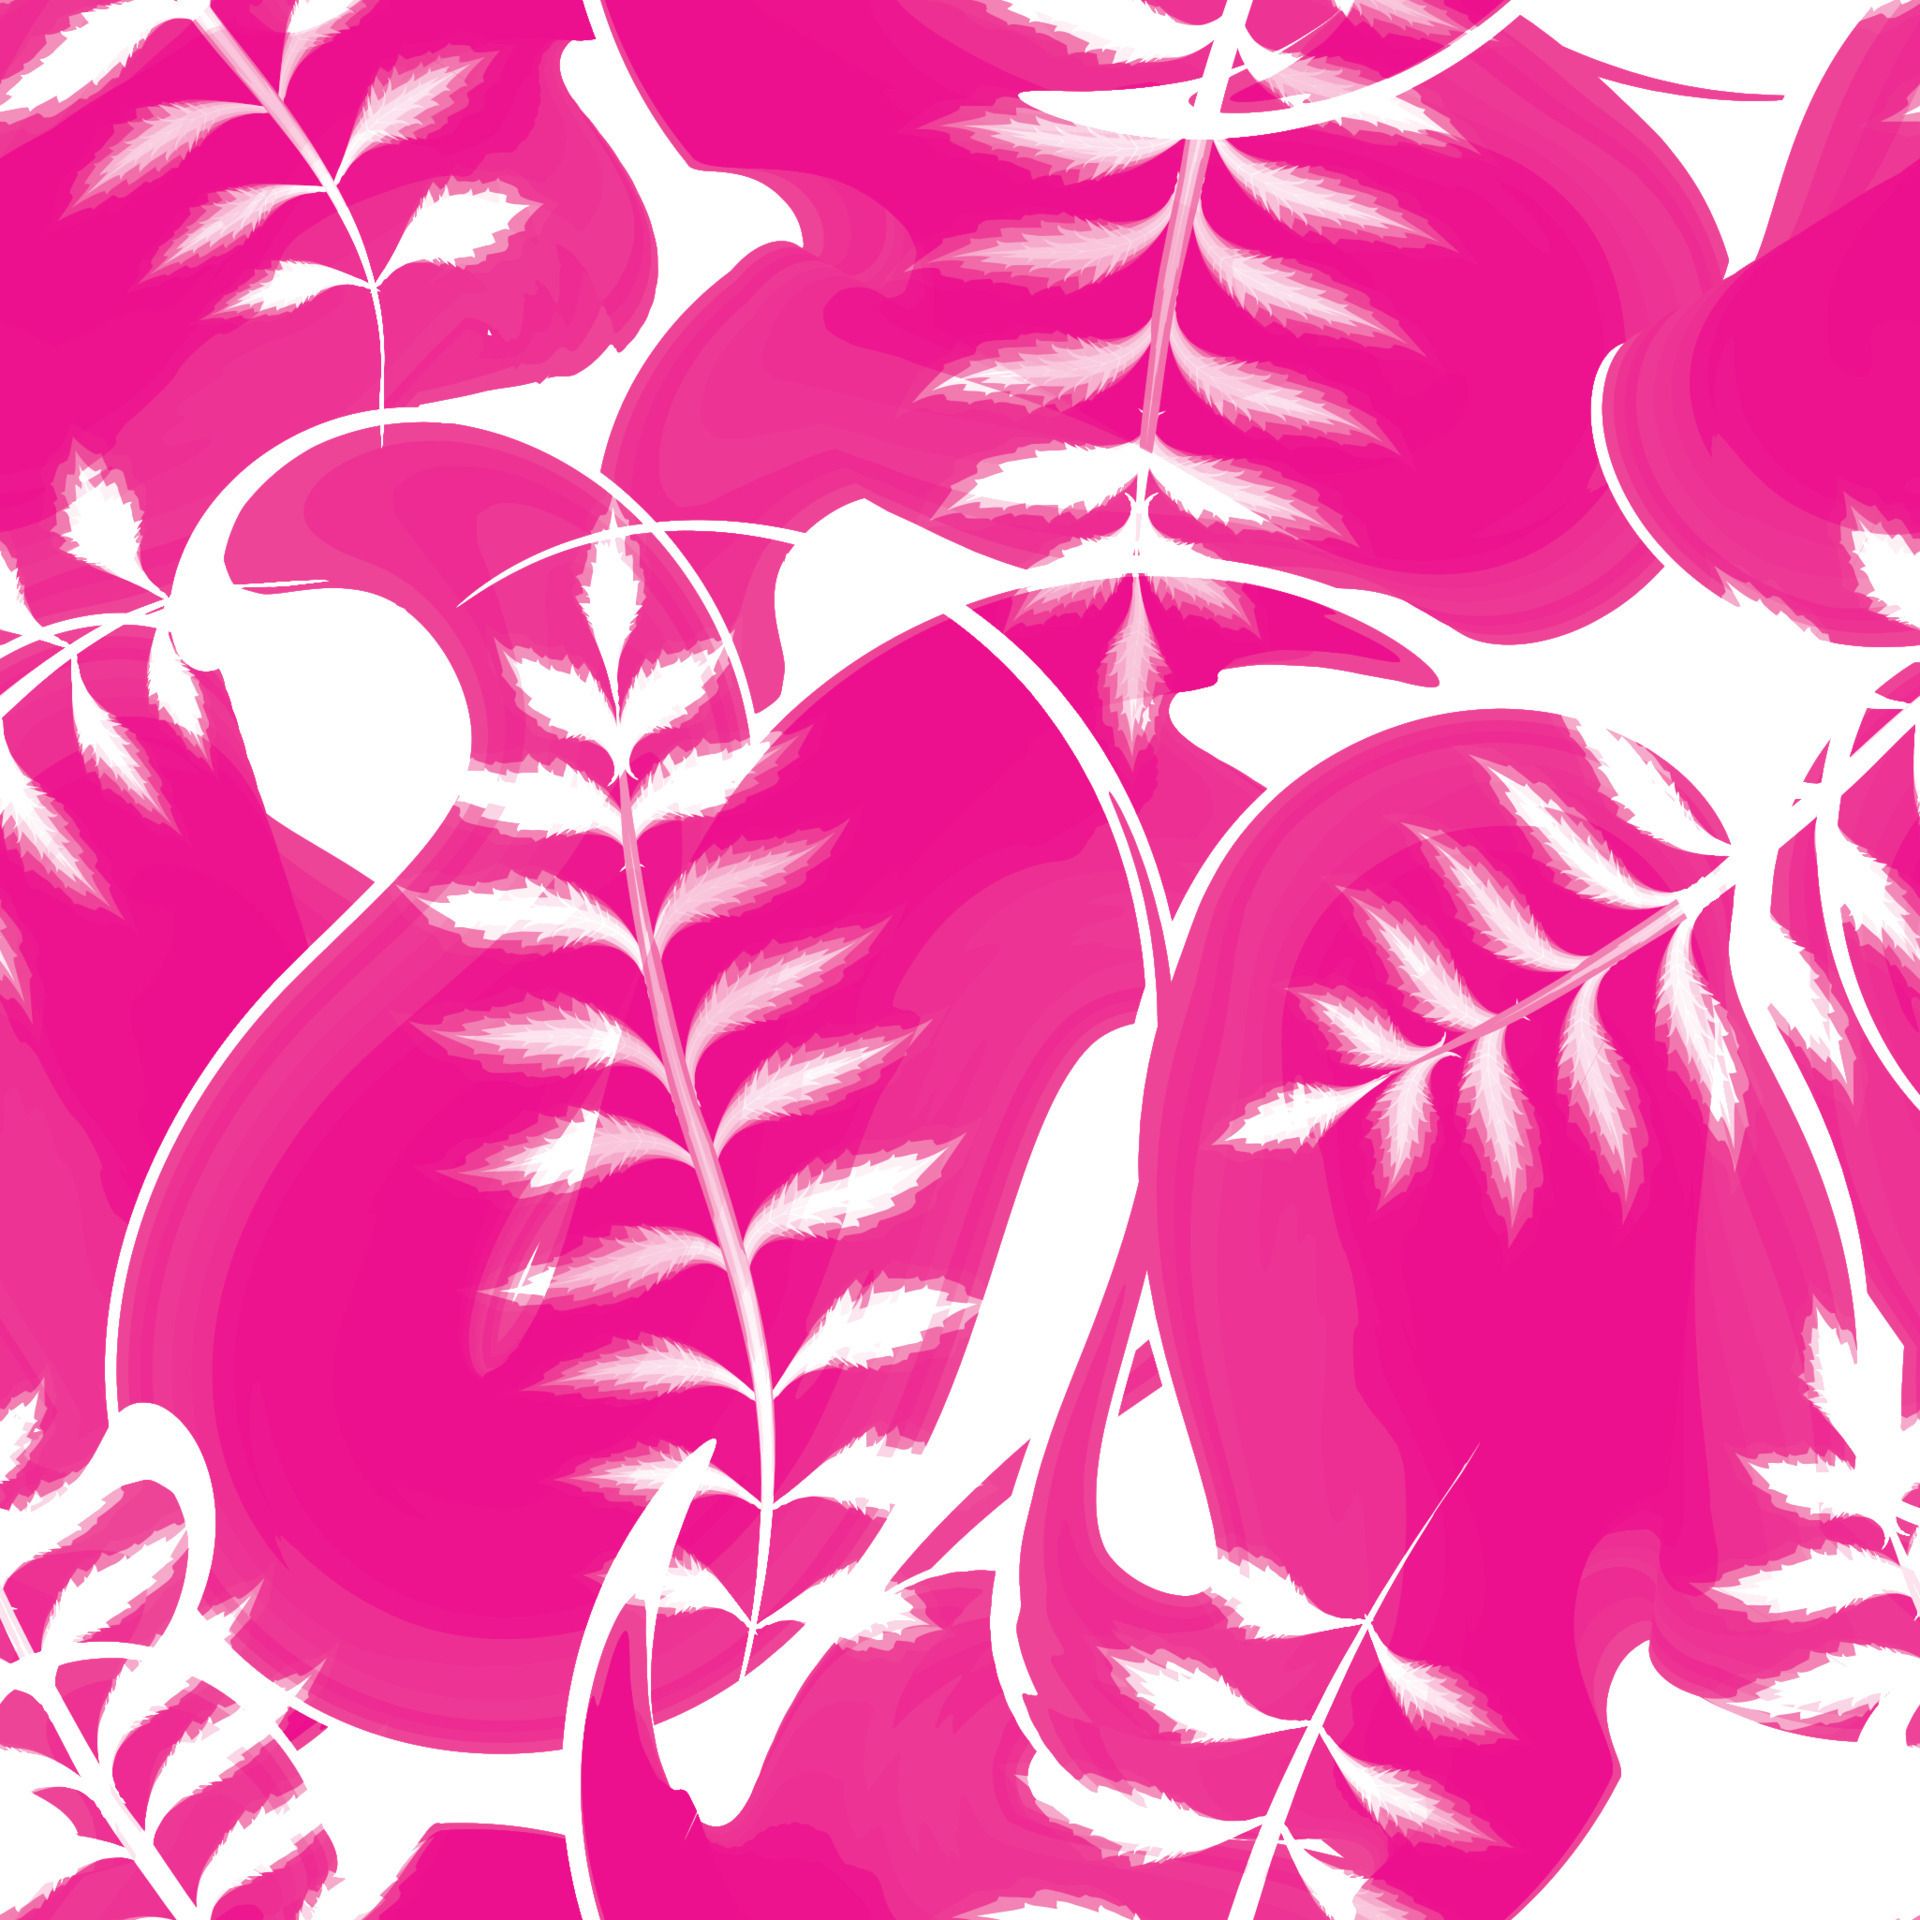 A pattern of pink leaves on a white background - Leaves